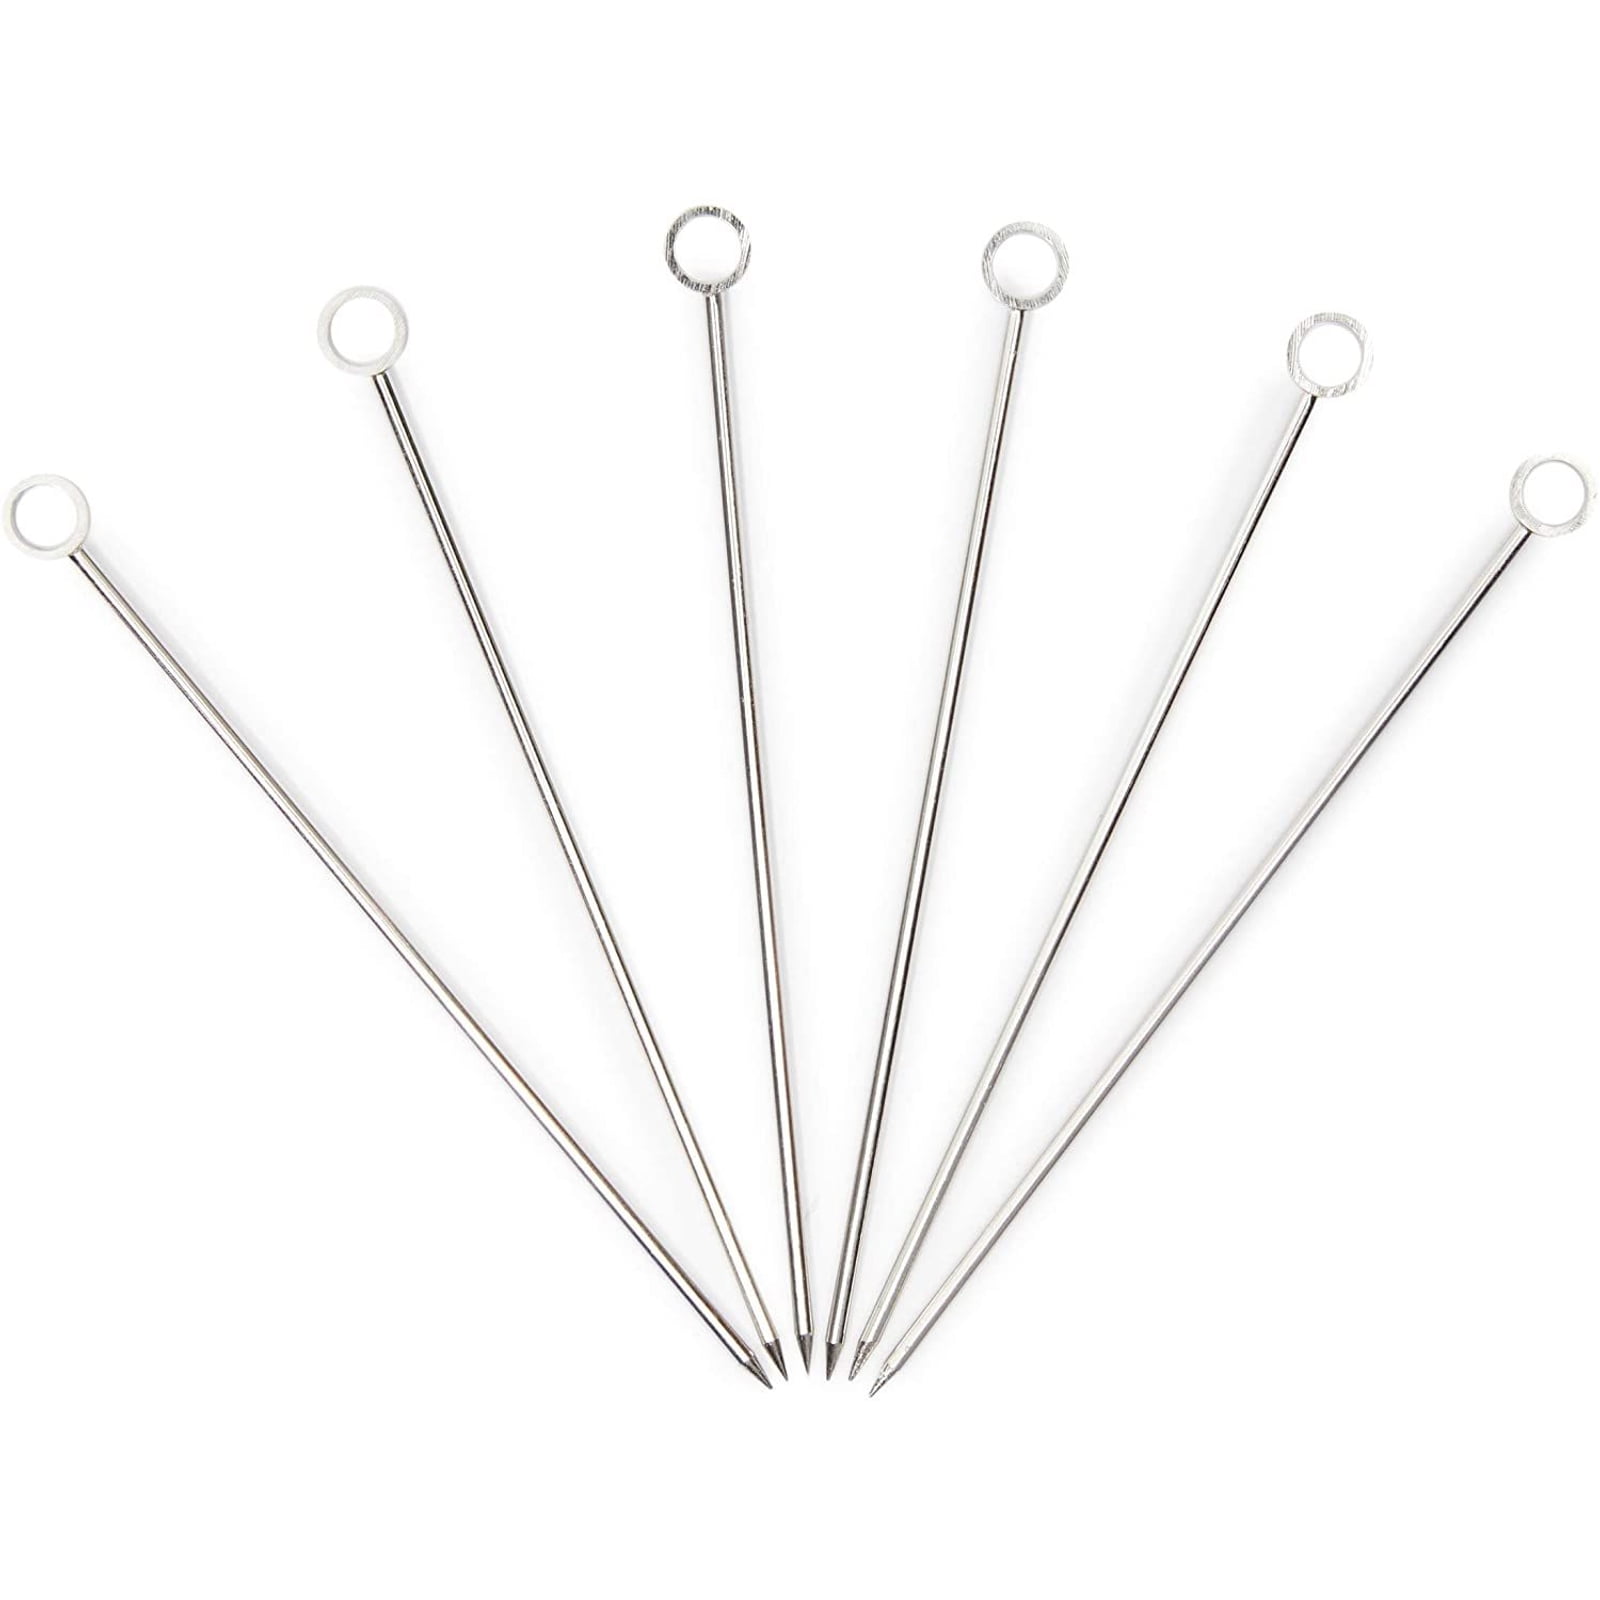 12 Pcs Quality Heavy Stainless Steel Cocktail Picks Fruit Sticks 4.3 Inch 